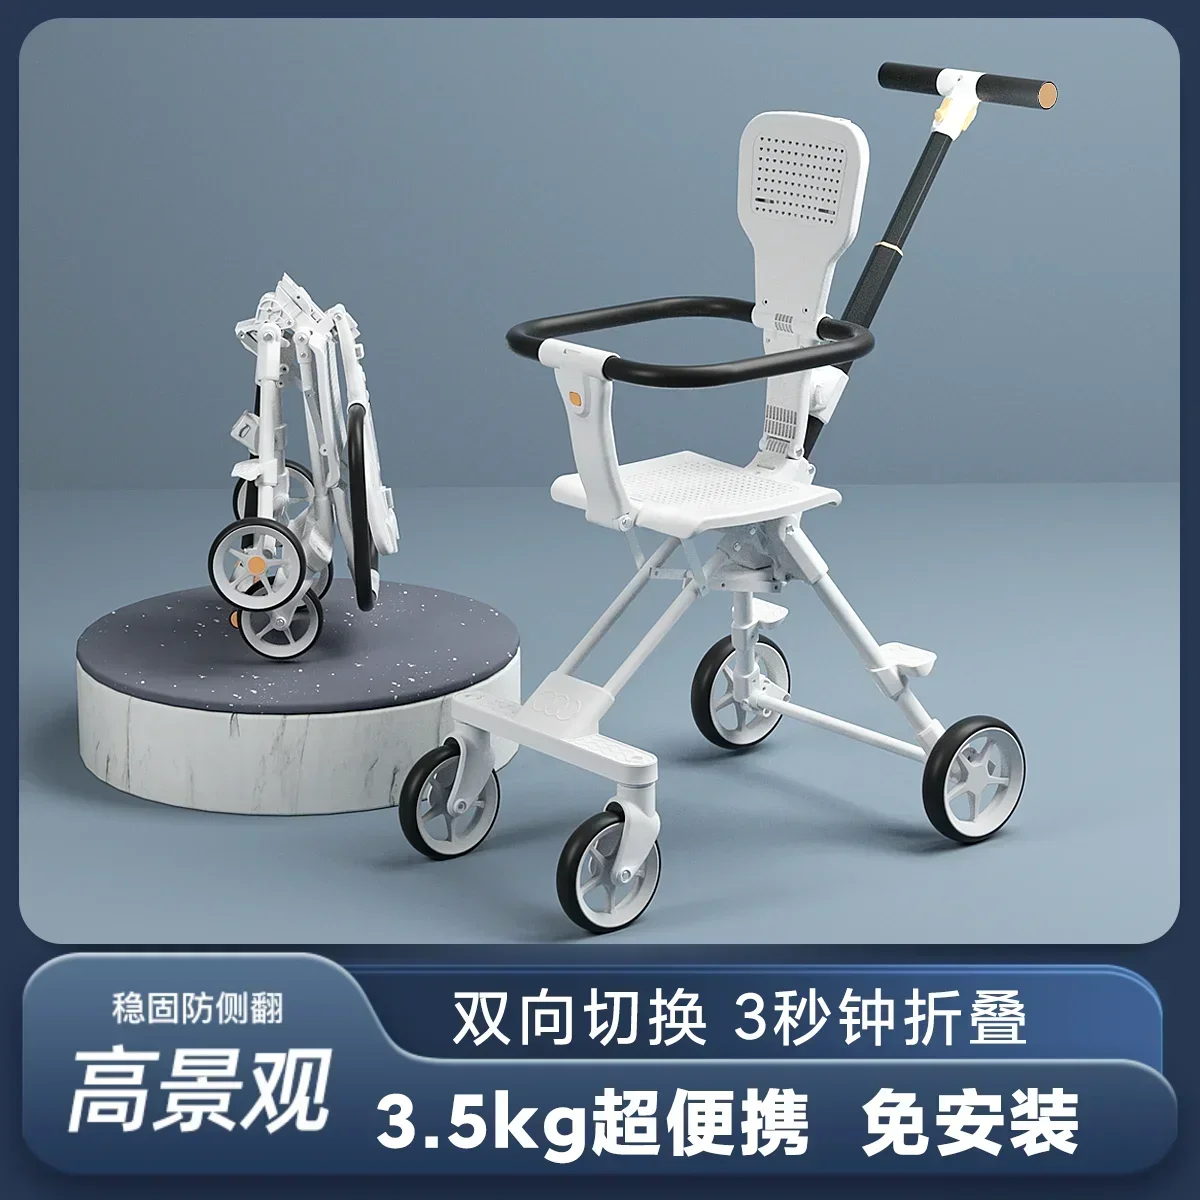 

The Baby Walking Artifact Is Super Light and Can Be Folded Into A Two-way Wheelbarrow To Go Out with A Baby Stroller.